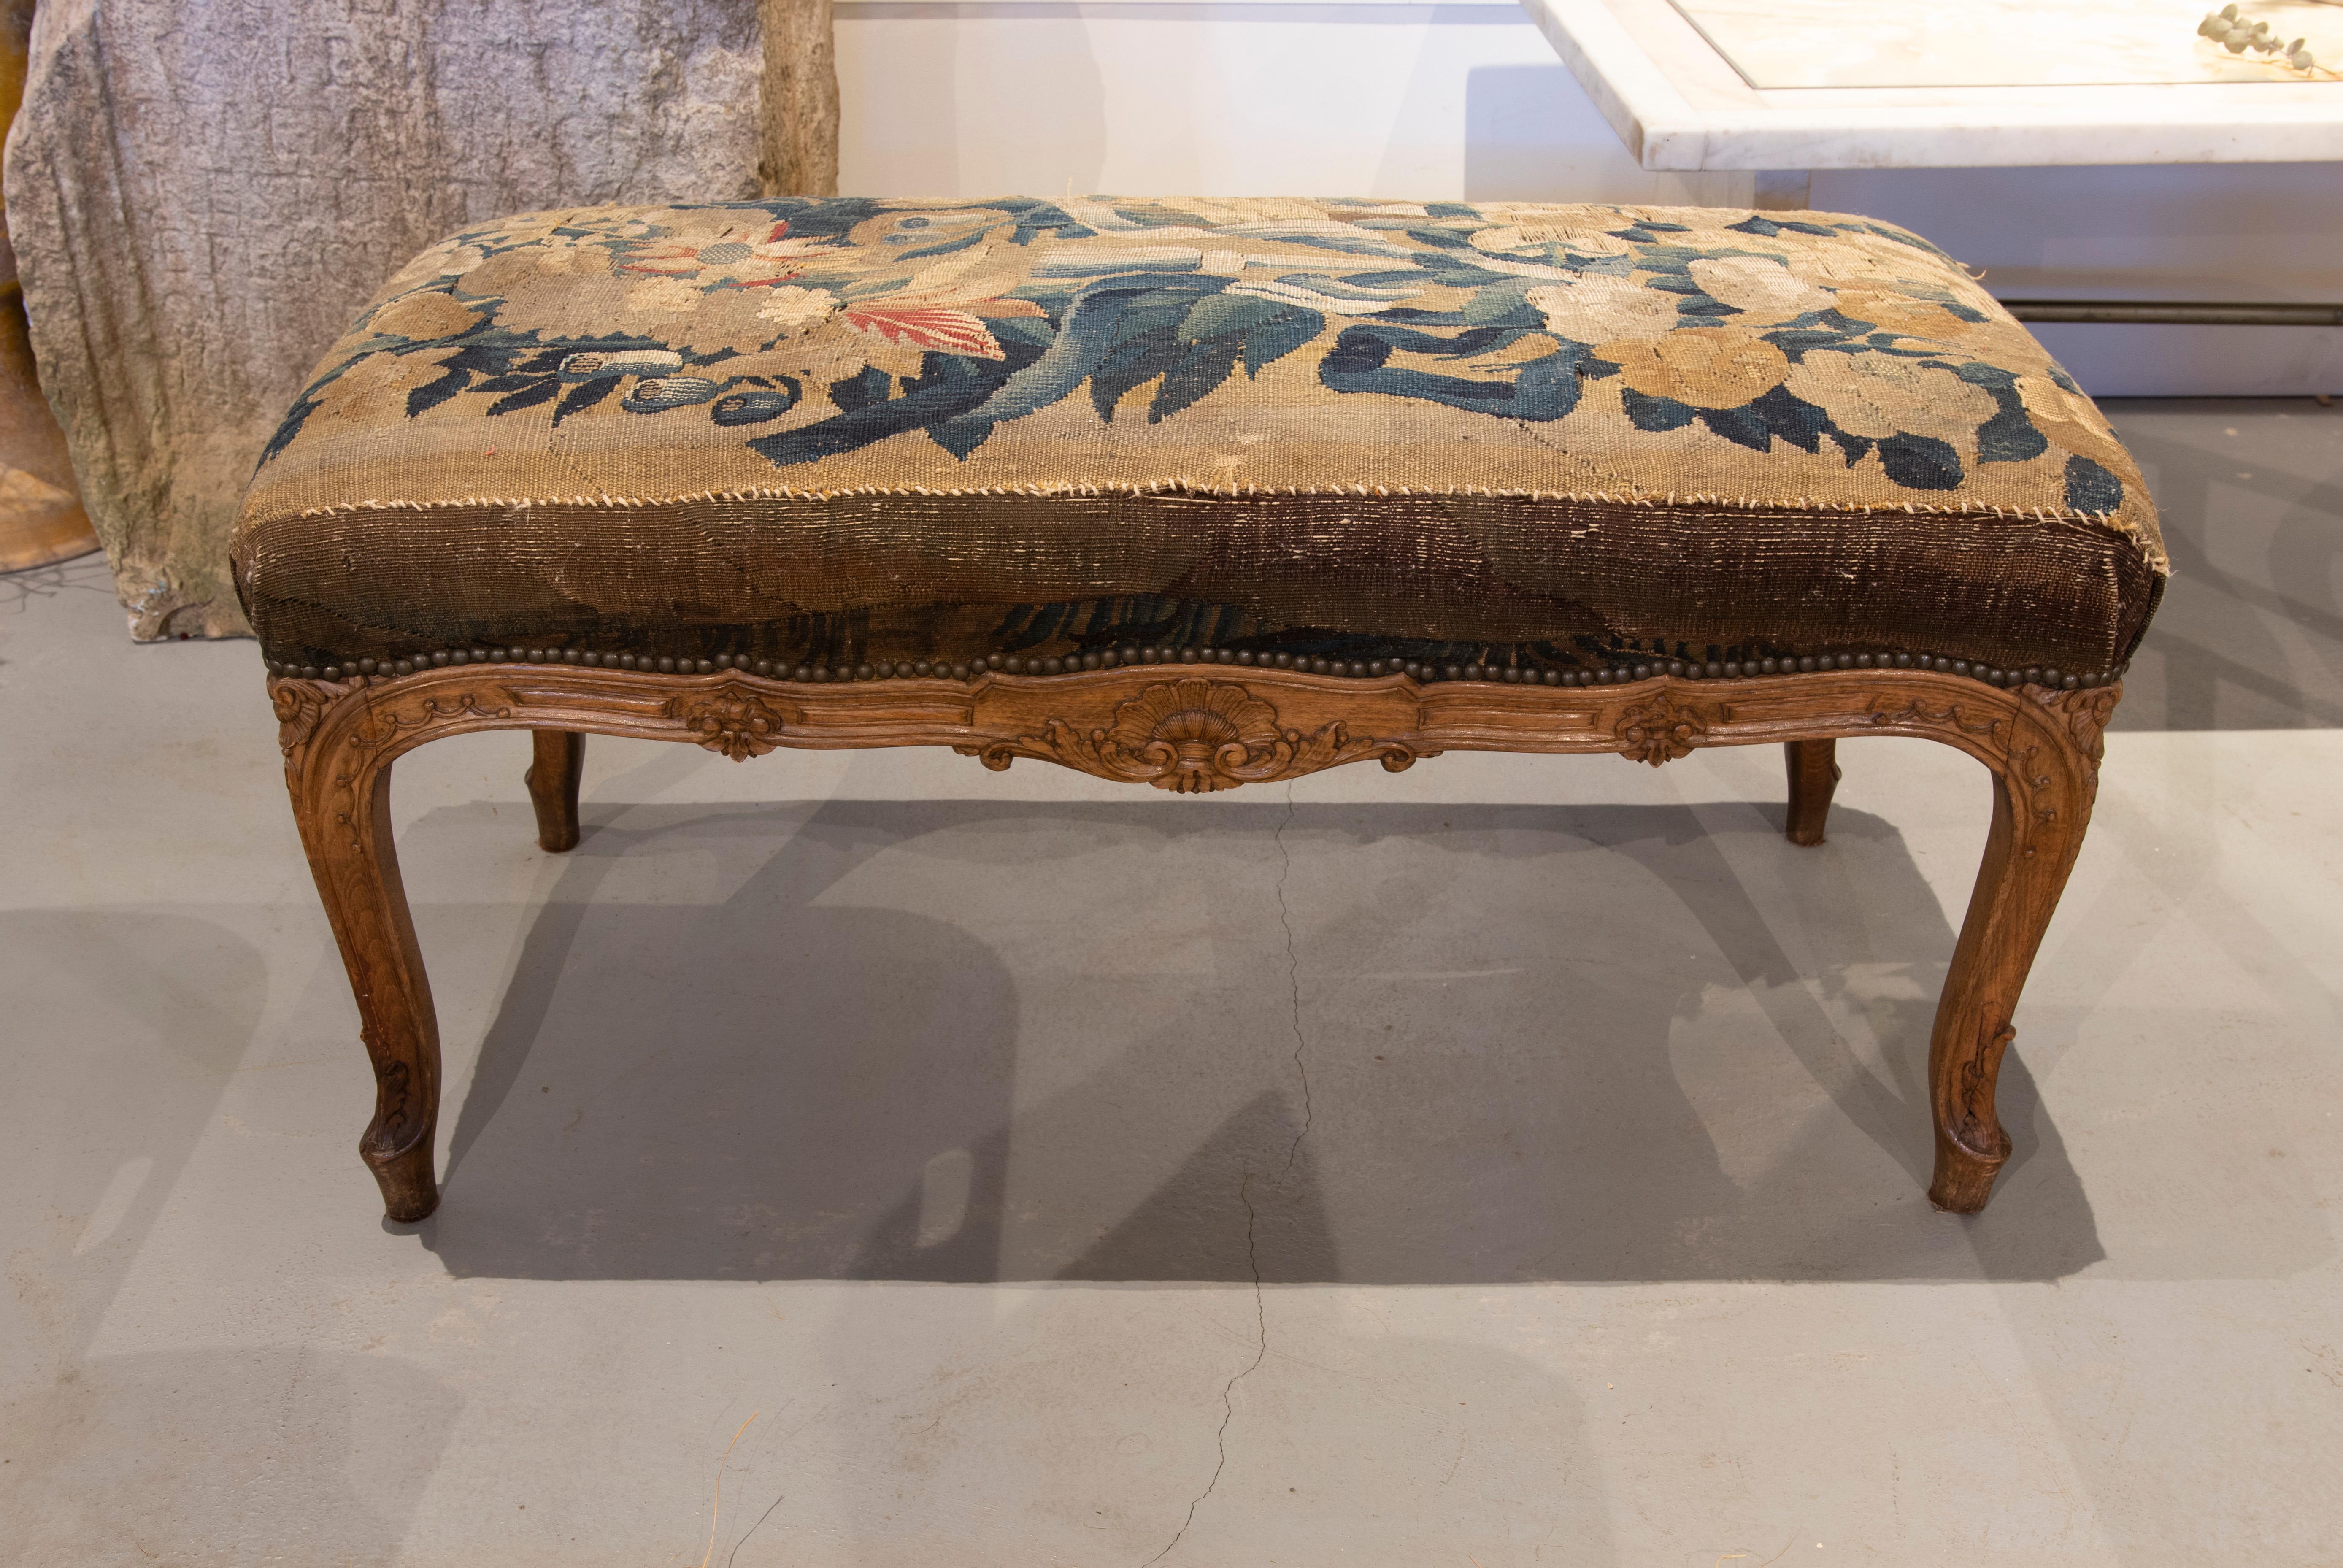 19th century French upholstered stool with tapestry fabric with flower theme.